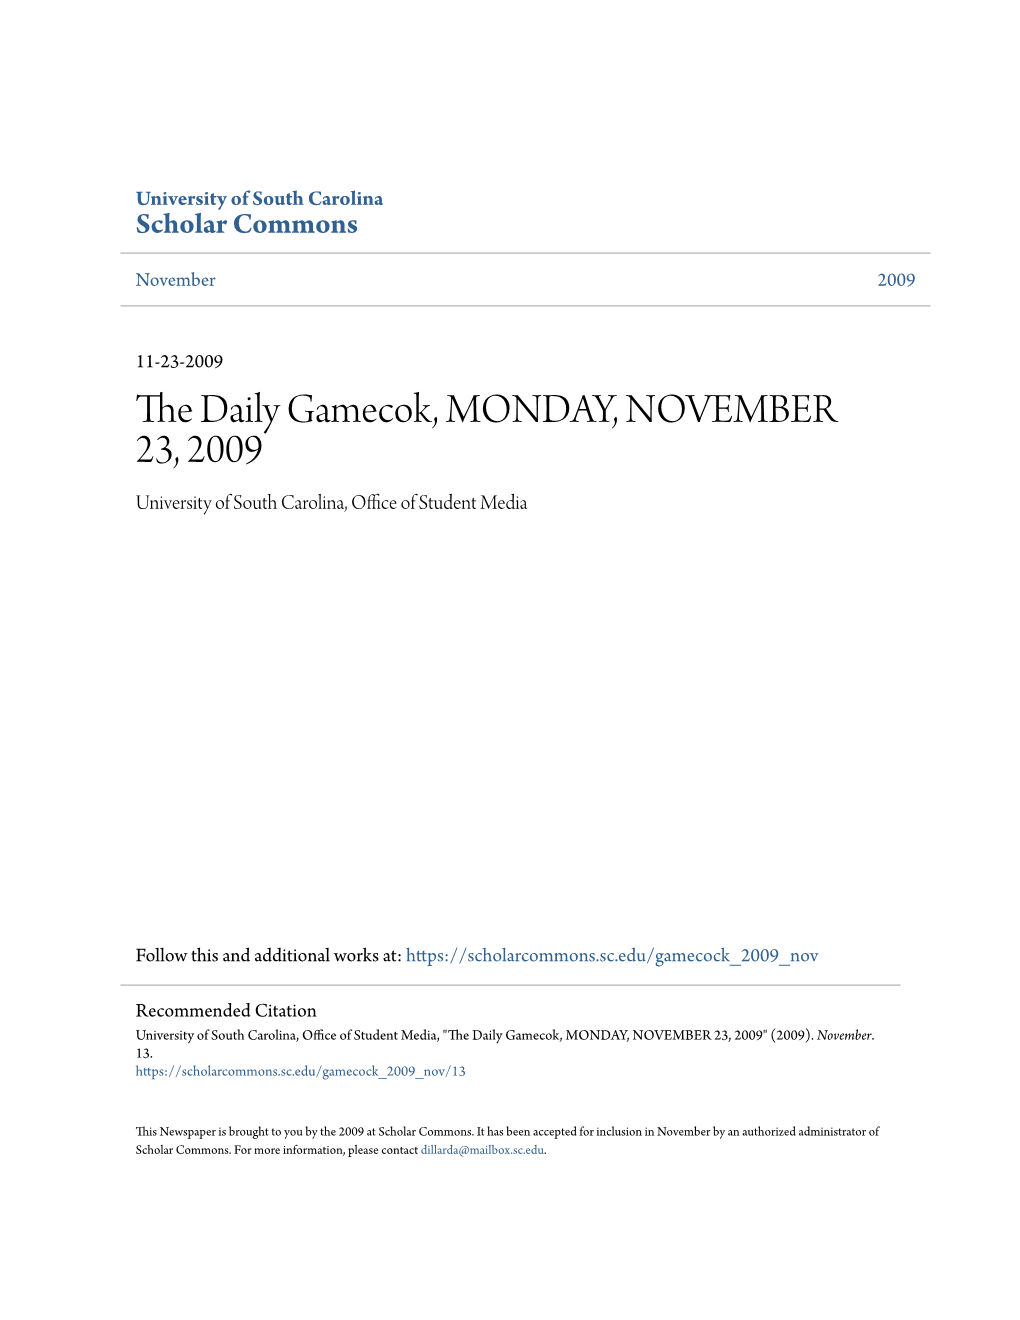 The Daily Gamecok, MONDAY, NOVEMBER 23, 2009